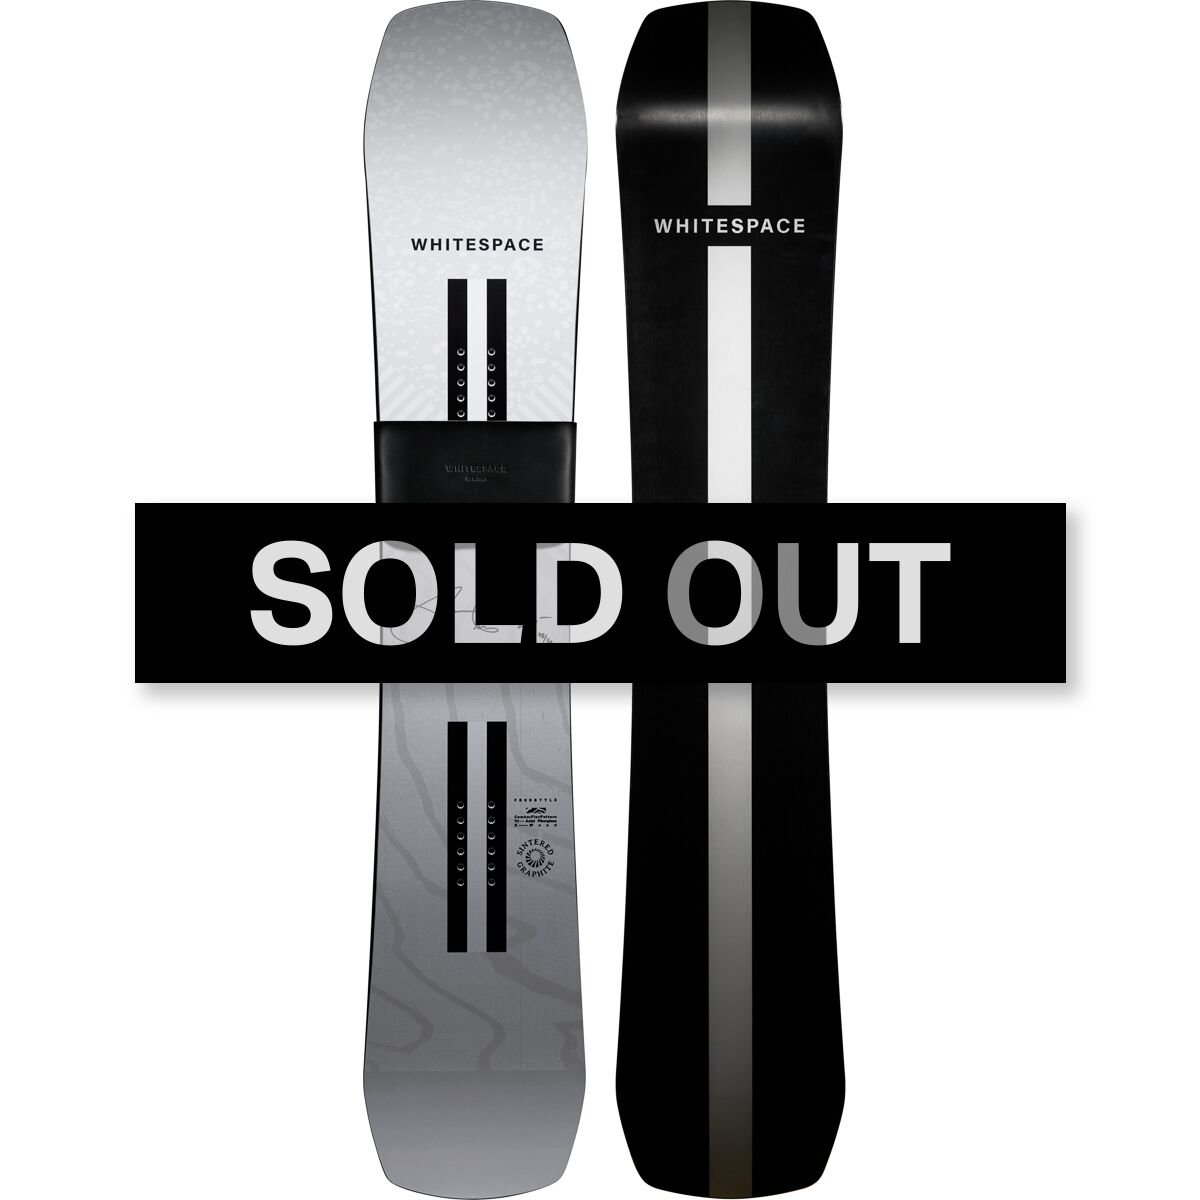 WHITESPACE Shaun White Pro - Limited Edition Autographed Snowboard -  Snowboard